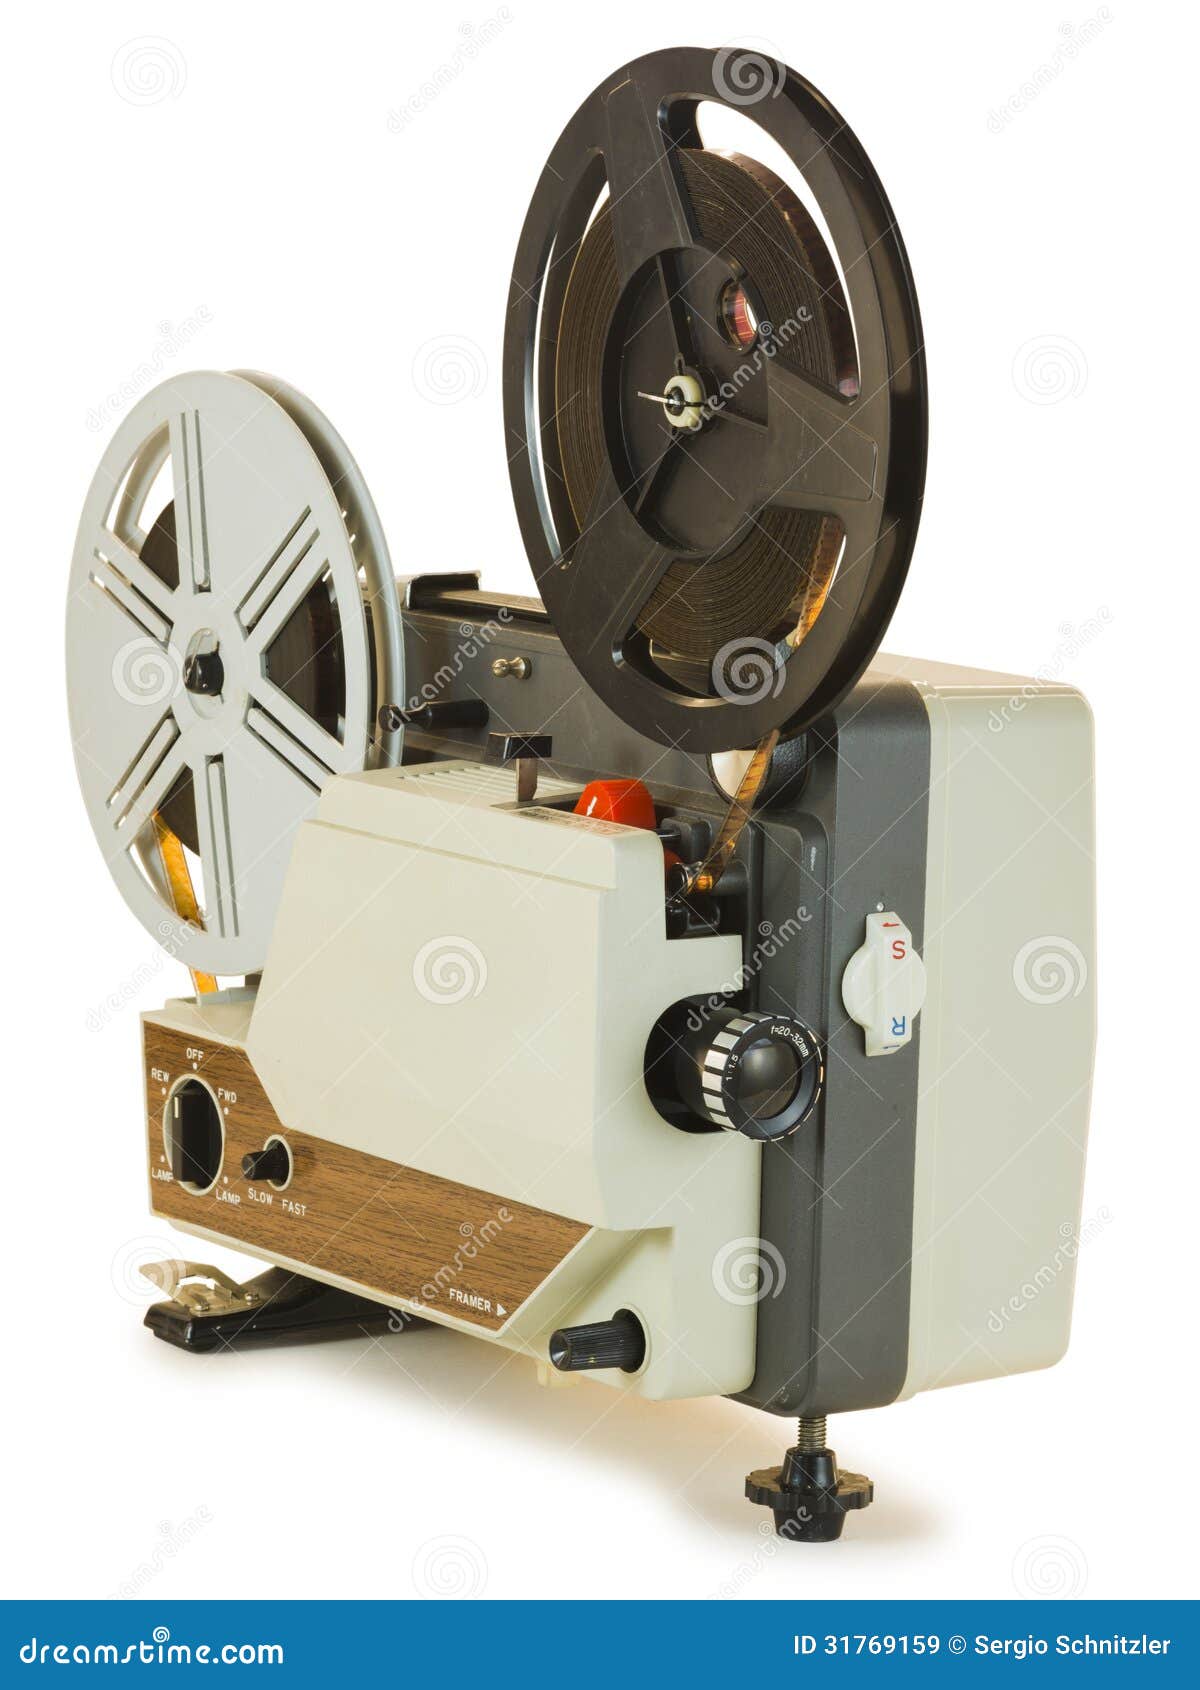 Super 8mm Film Projector 04 Stock Image - Image of clipping, home: 31769159